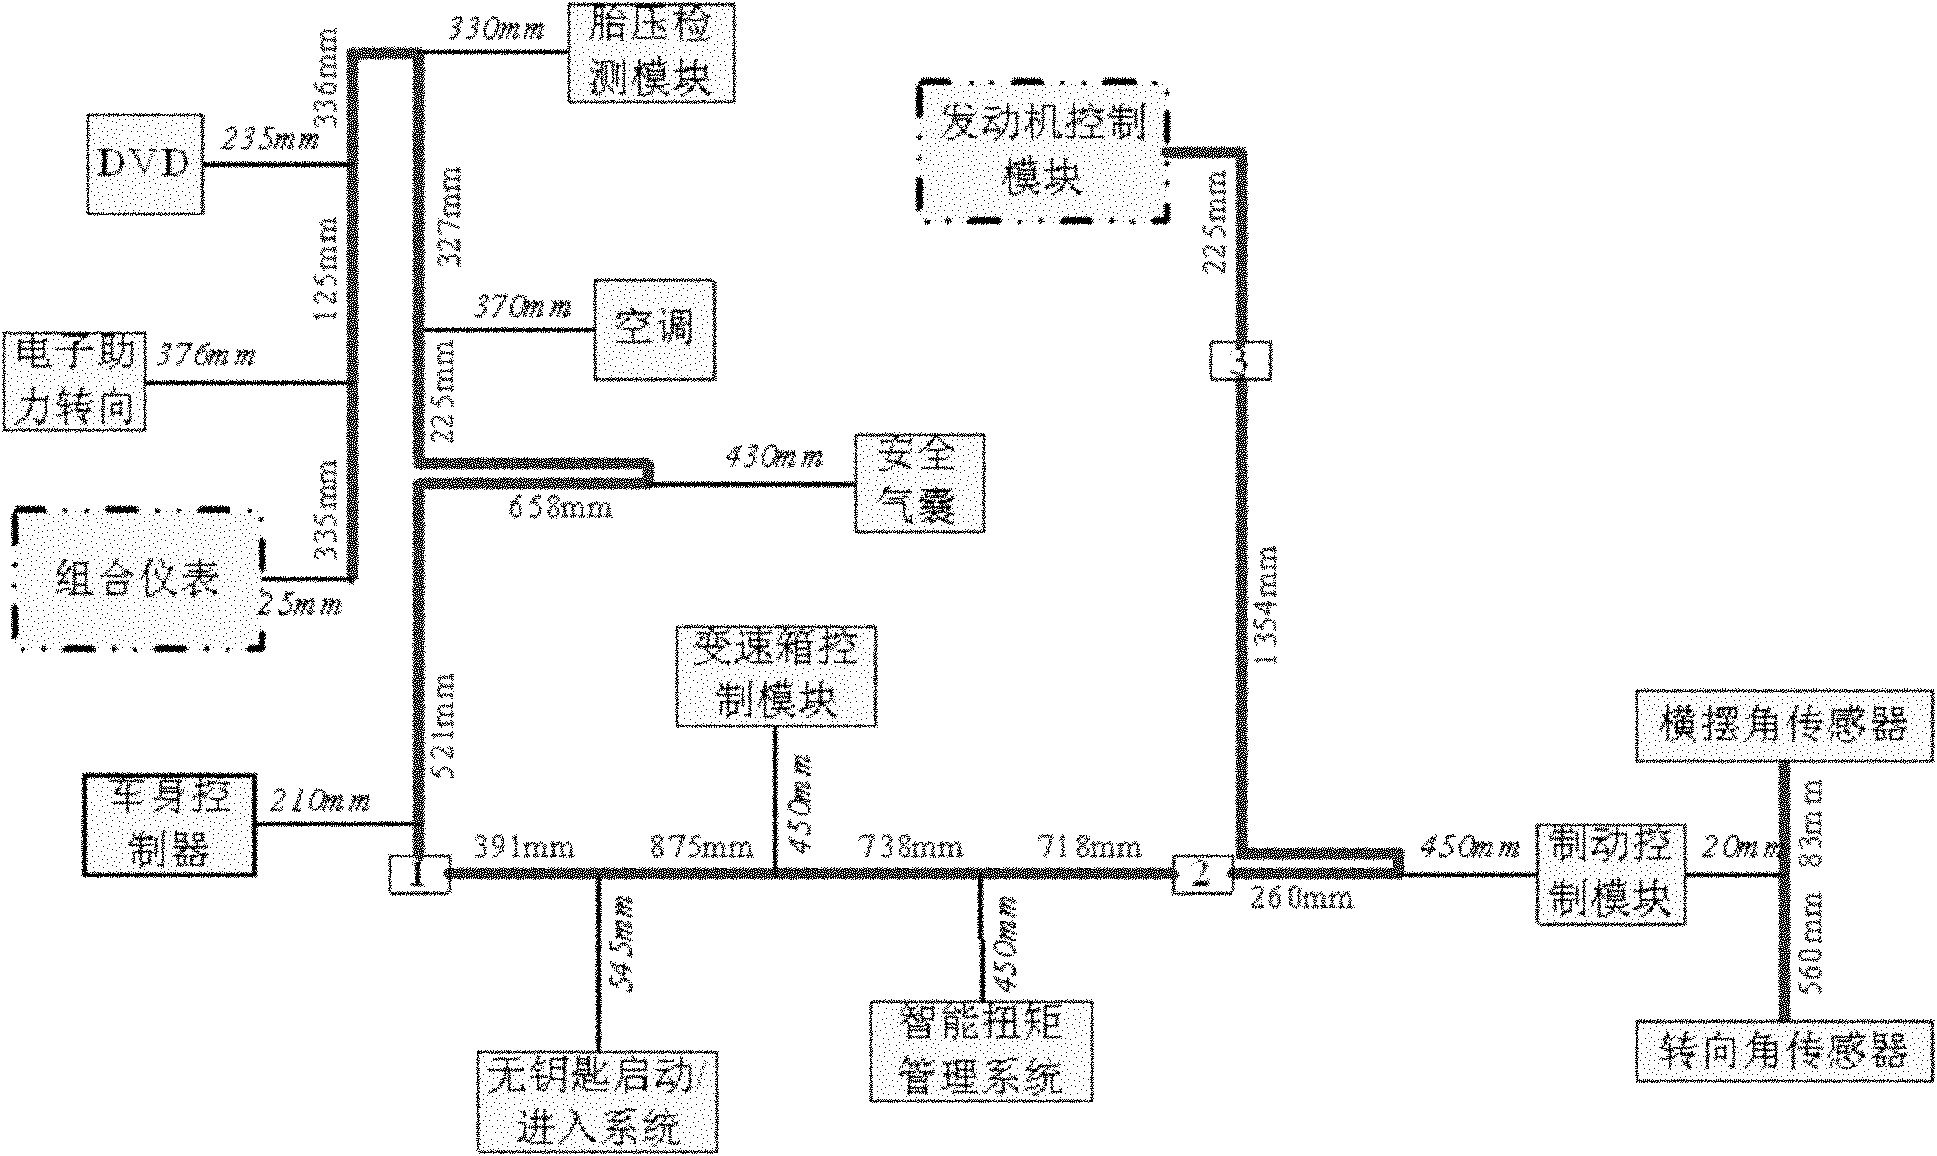 Controller area network (CAN) and local interconnect network (LIN) bus-based vehicular network communication system